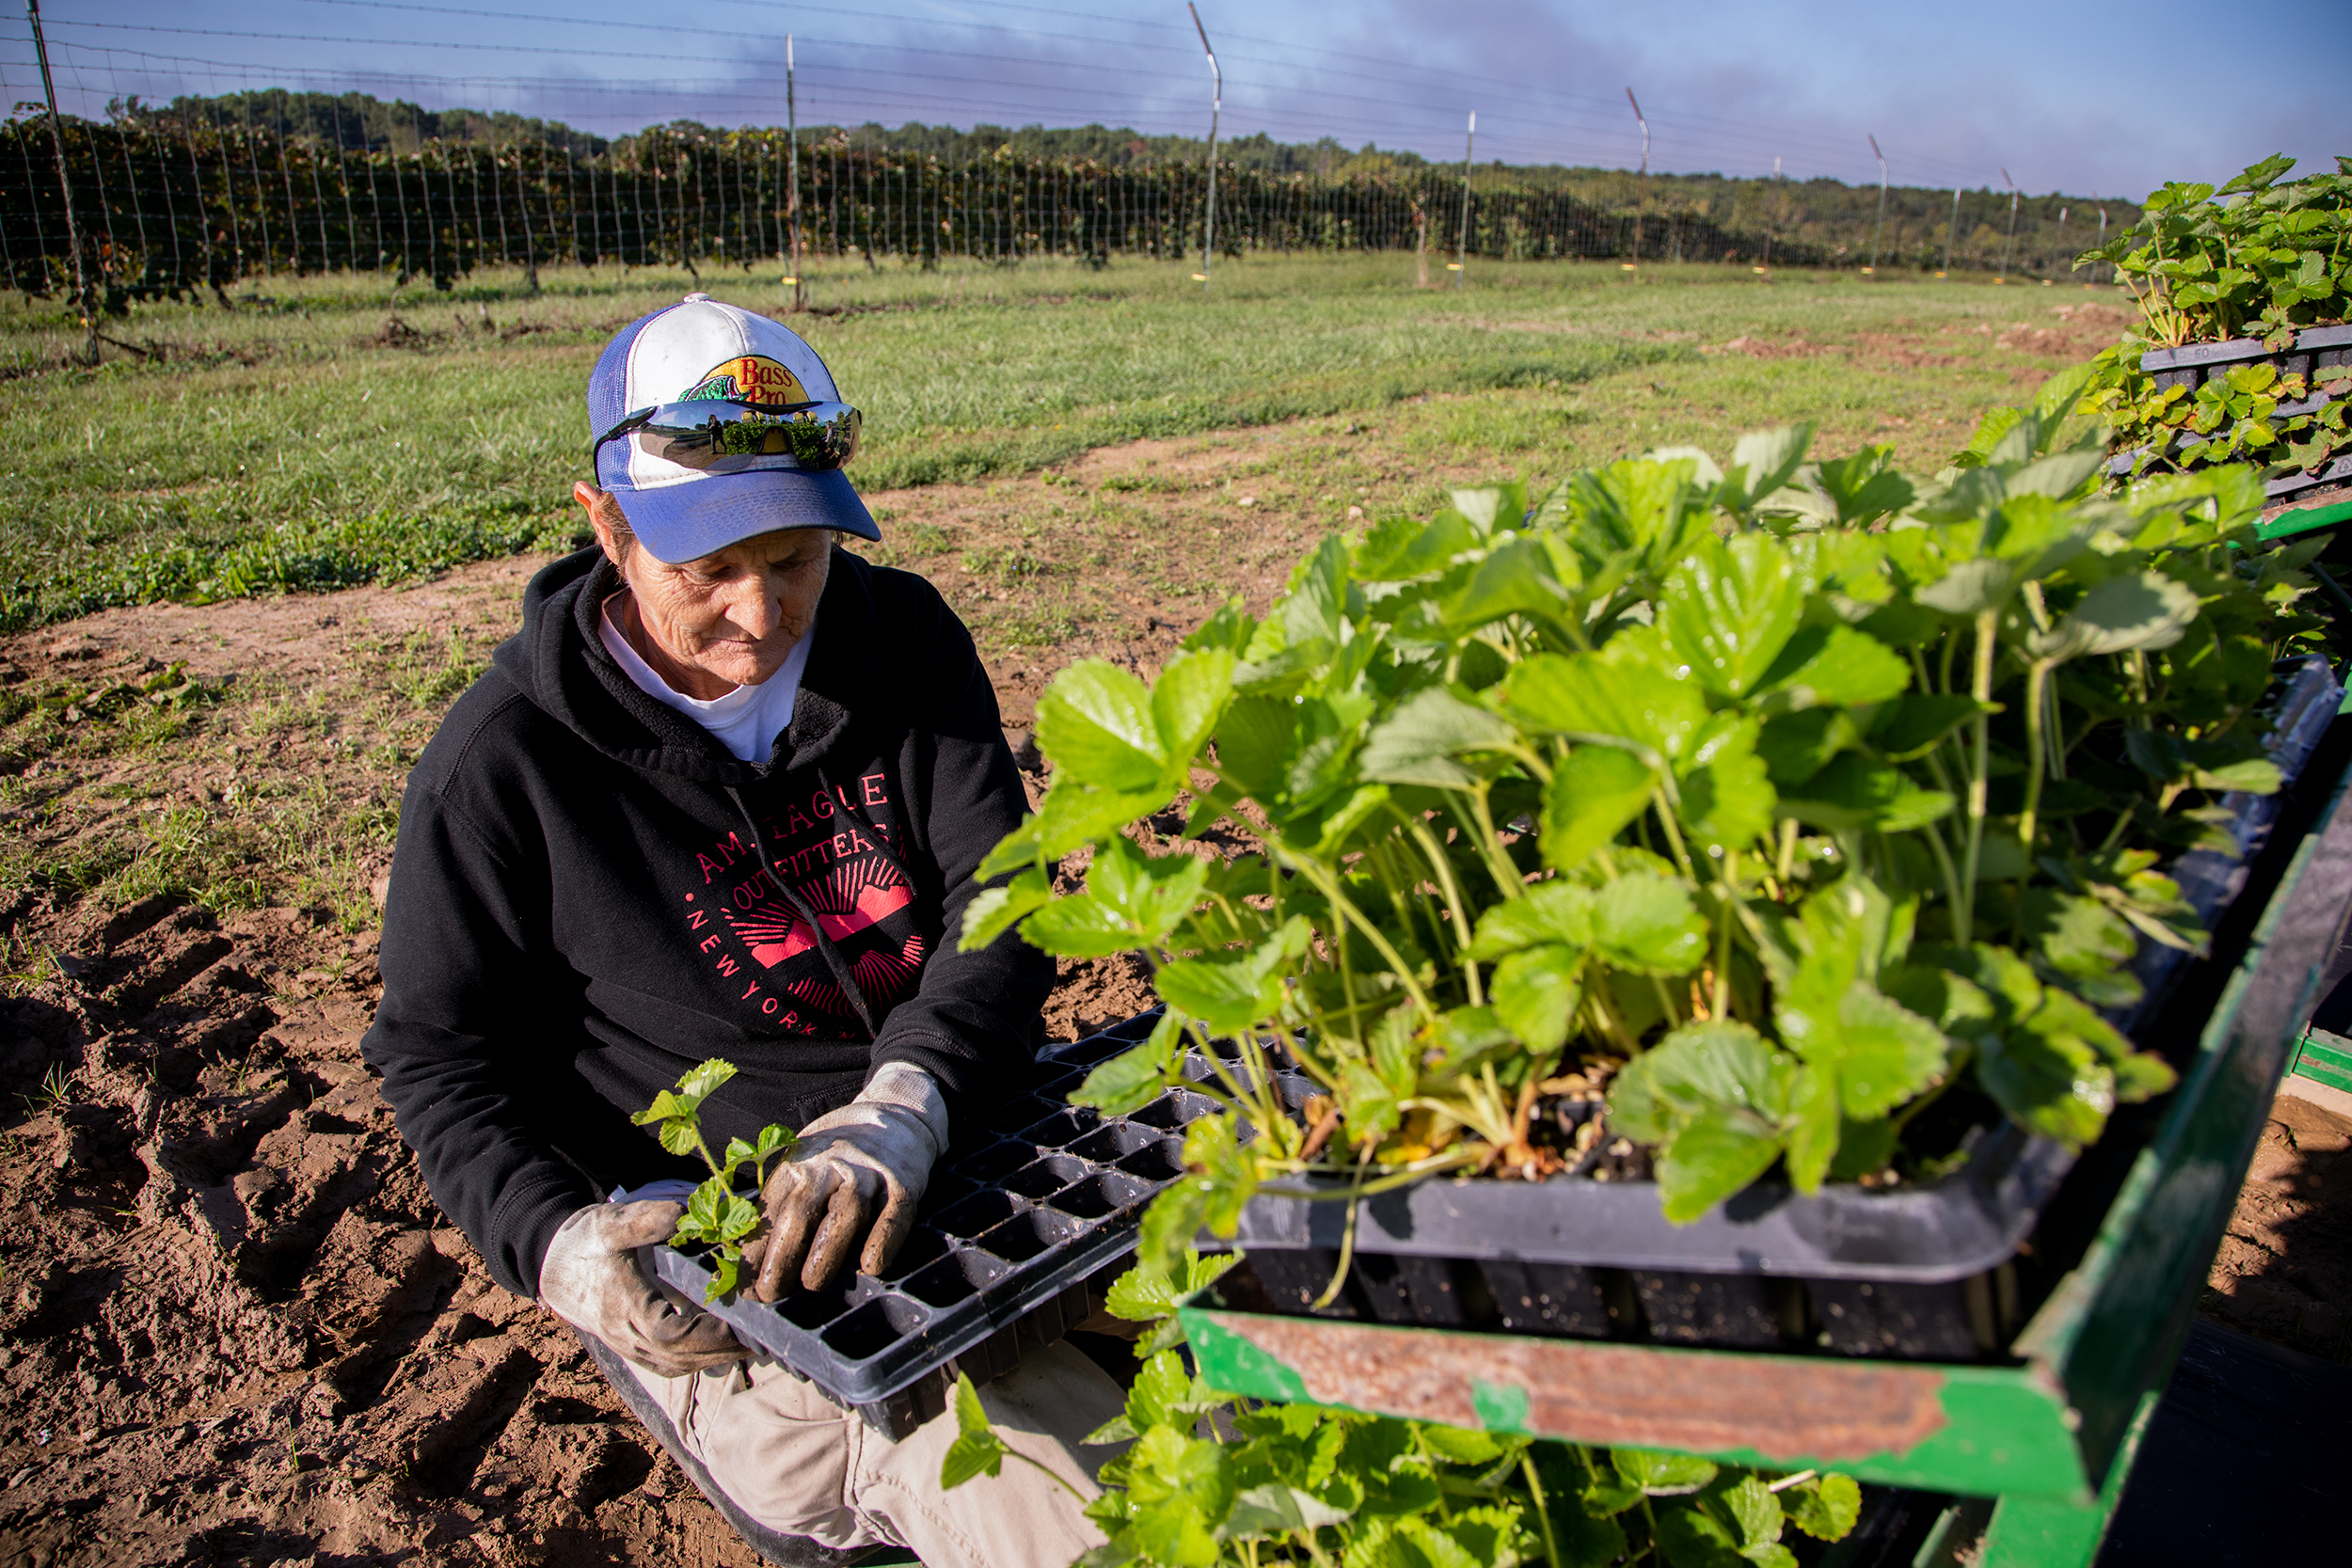  Brenda get’s around $8 per hour for planting strawberries at the Simpson’s Farm. They plant about 22.000 of them daily. She is hoping to find a job that would allow her to work indoors during the colder months. Anticipating news from her recent job 